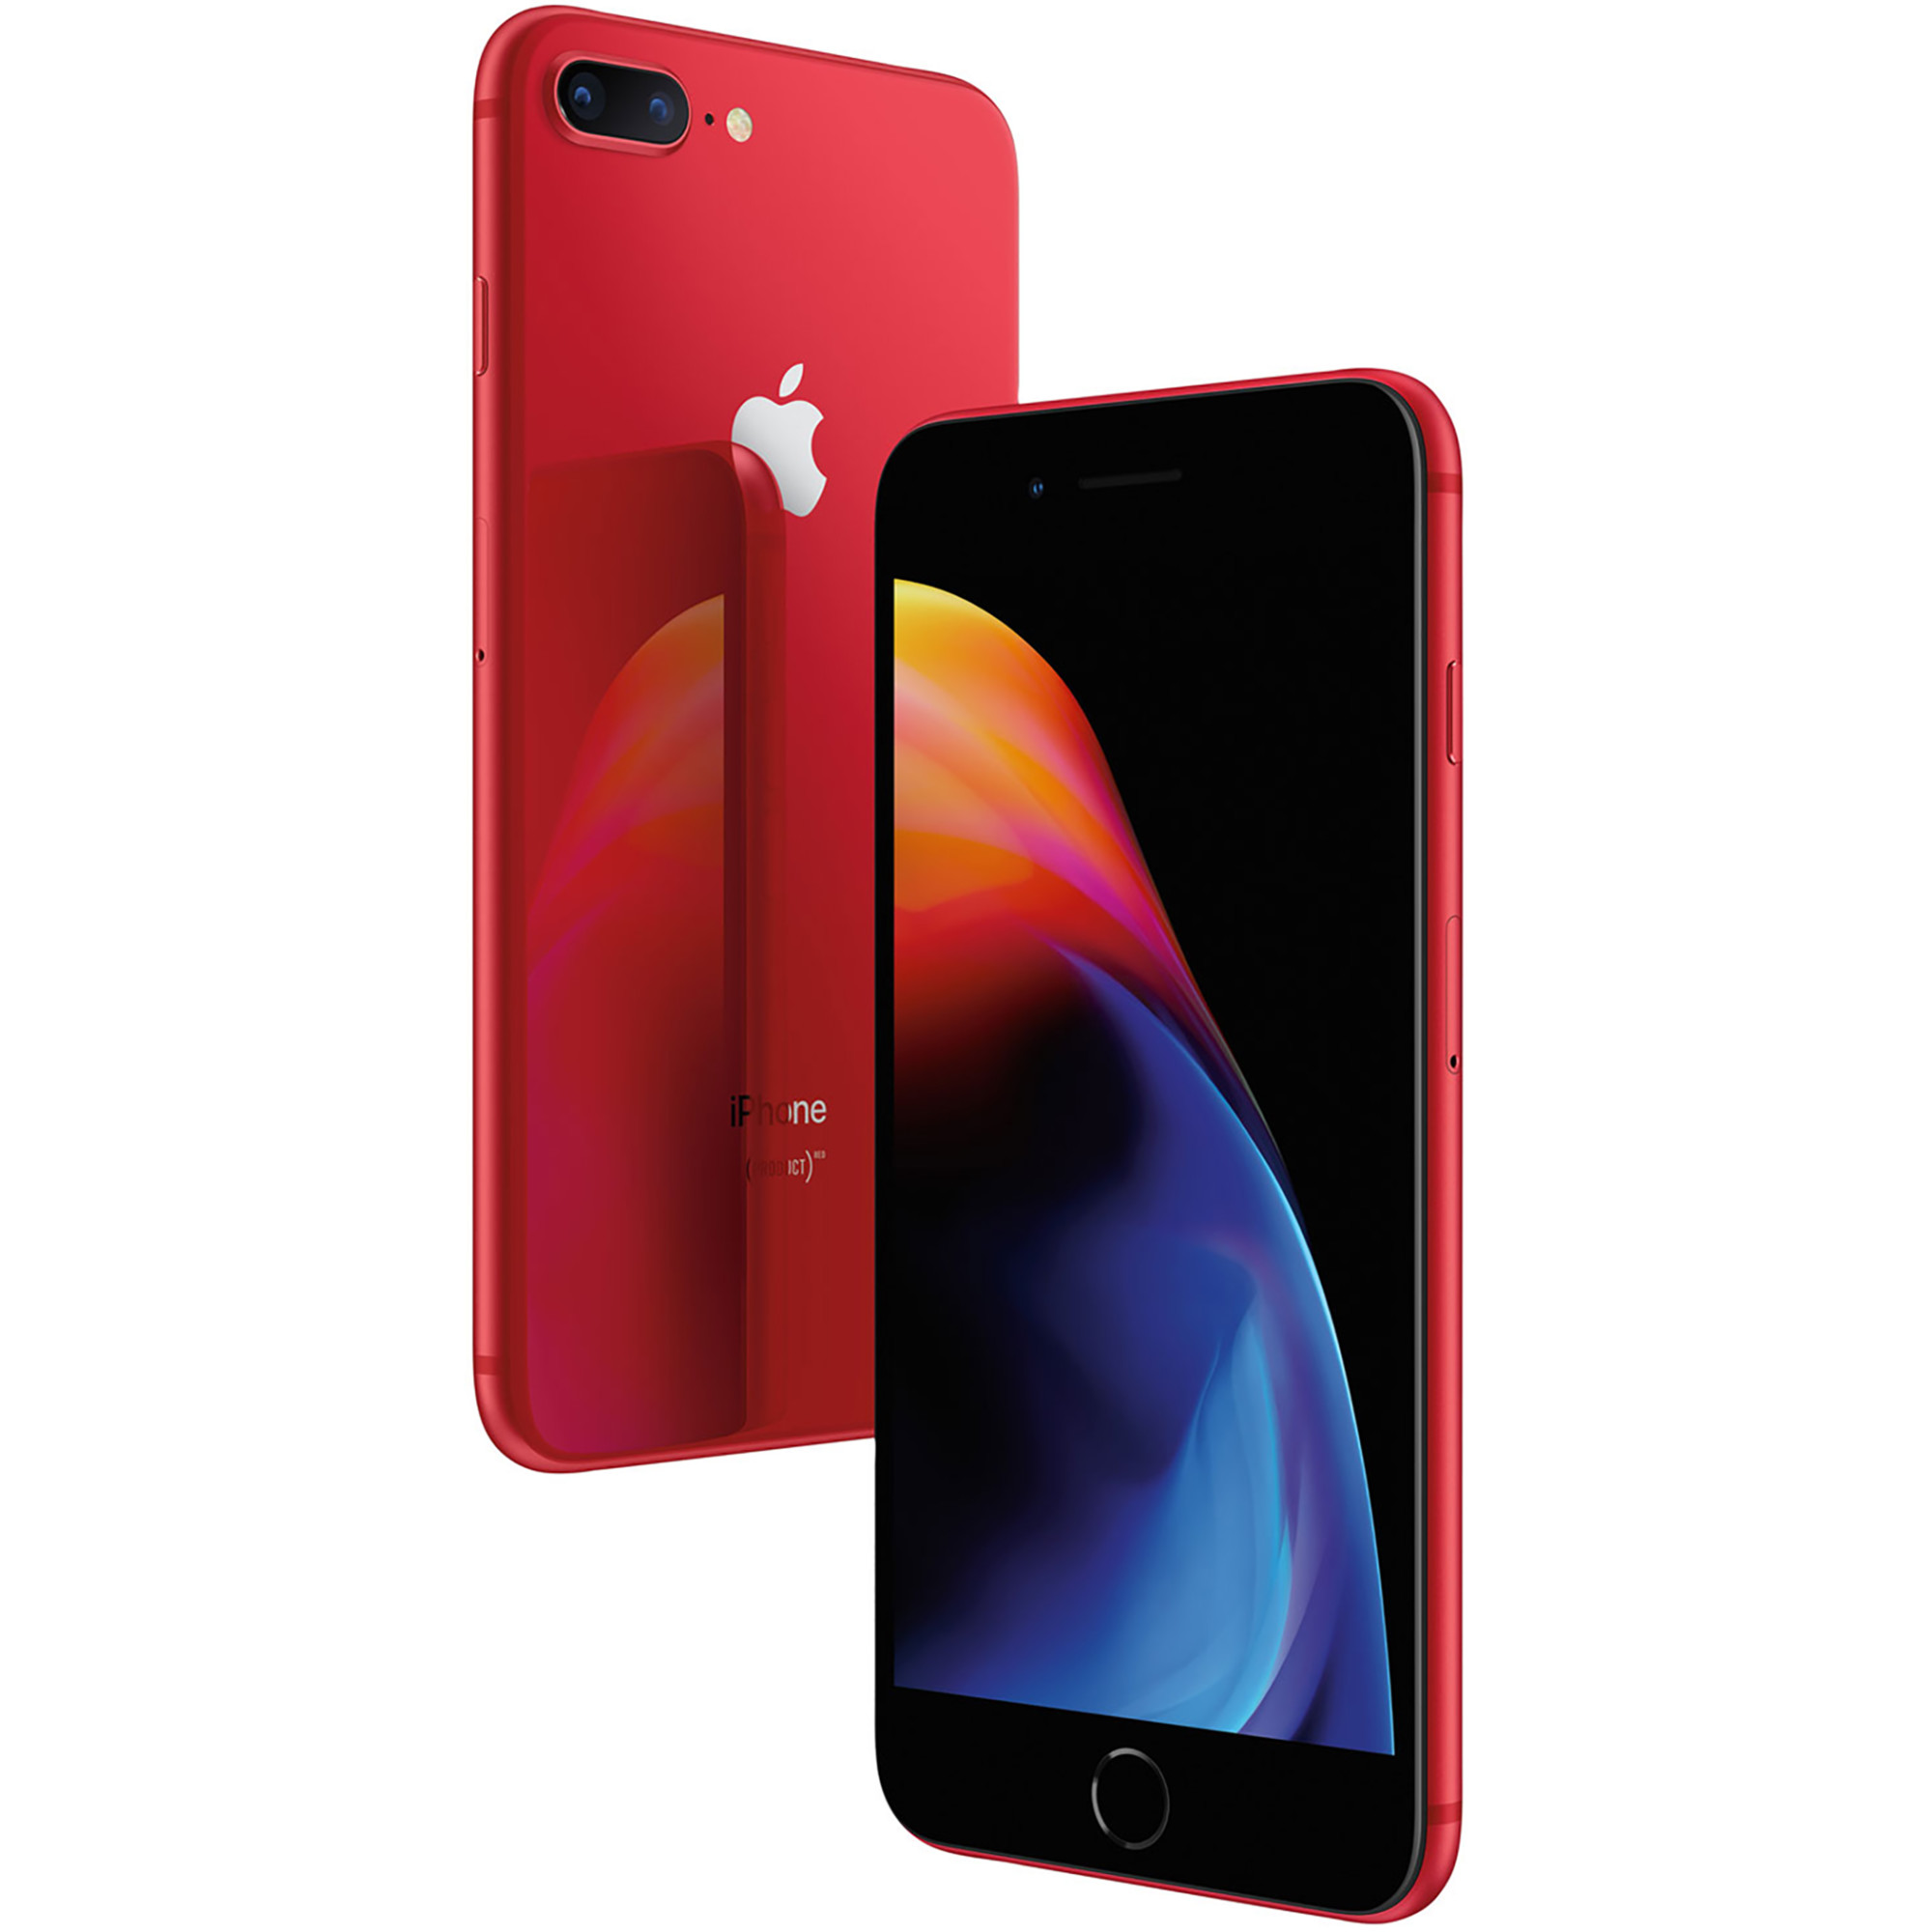 Apple iPhone 8 Plus 64GB Red GSM Unlocked (AT&T + T-Mobile) Smartphone - Grade B Used - image 1 of 4